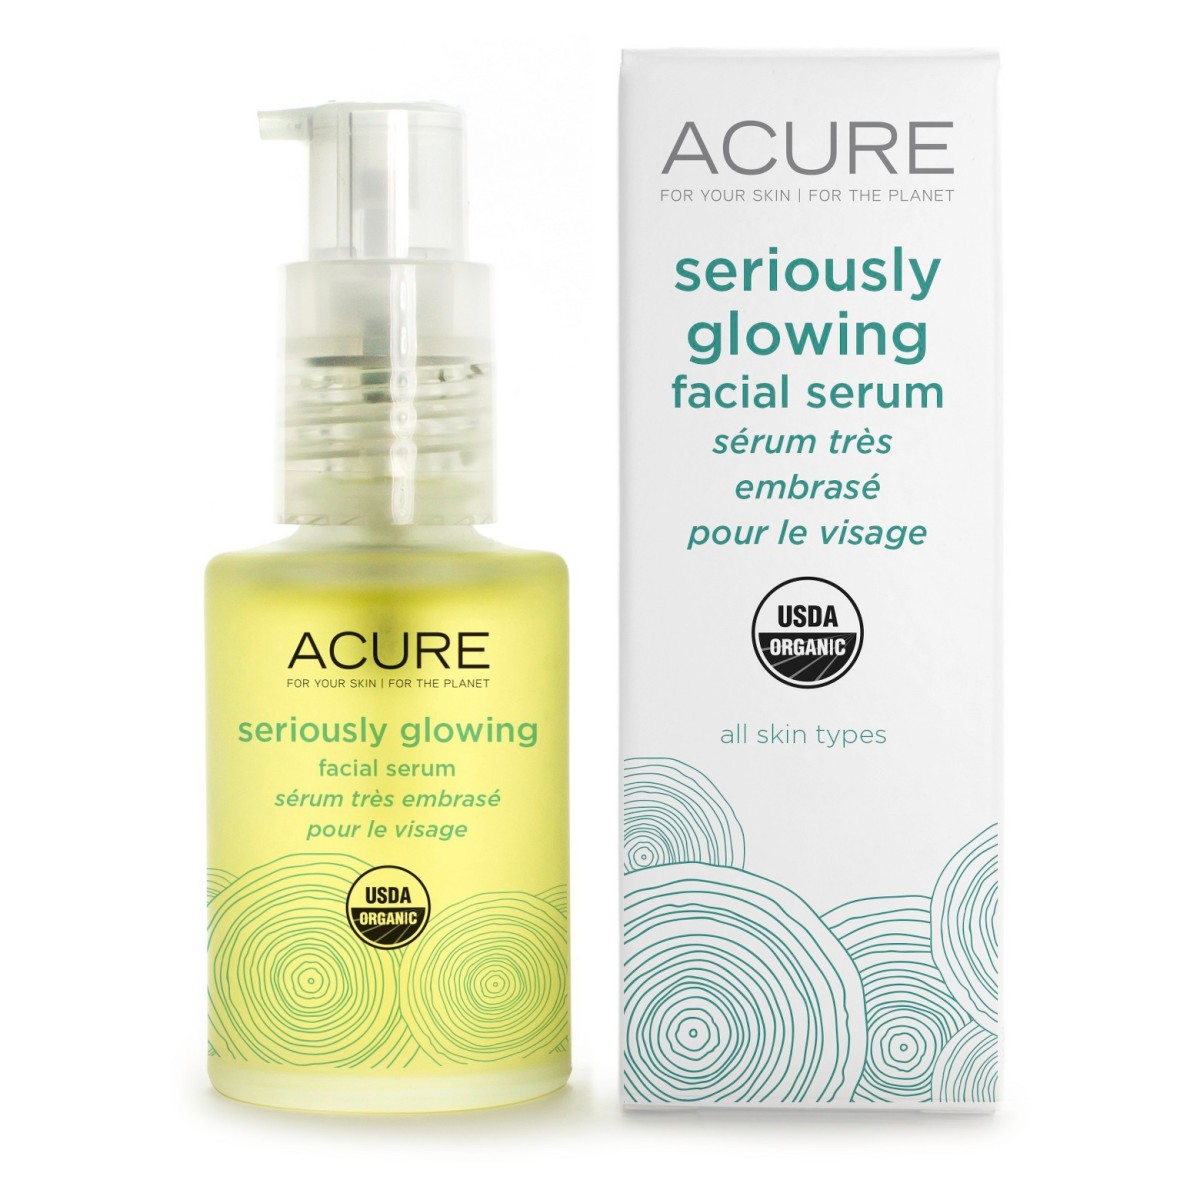 Acure Seriously Glowing Facial Serum